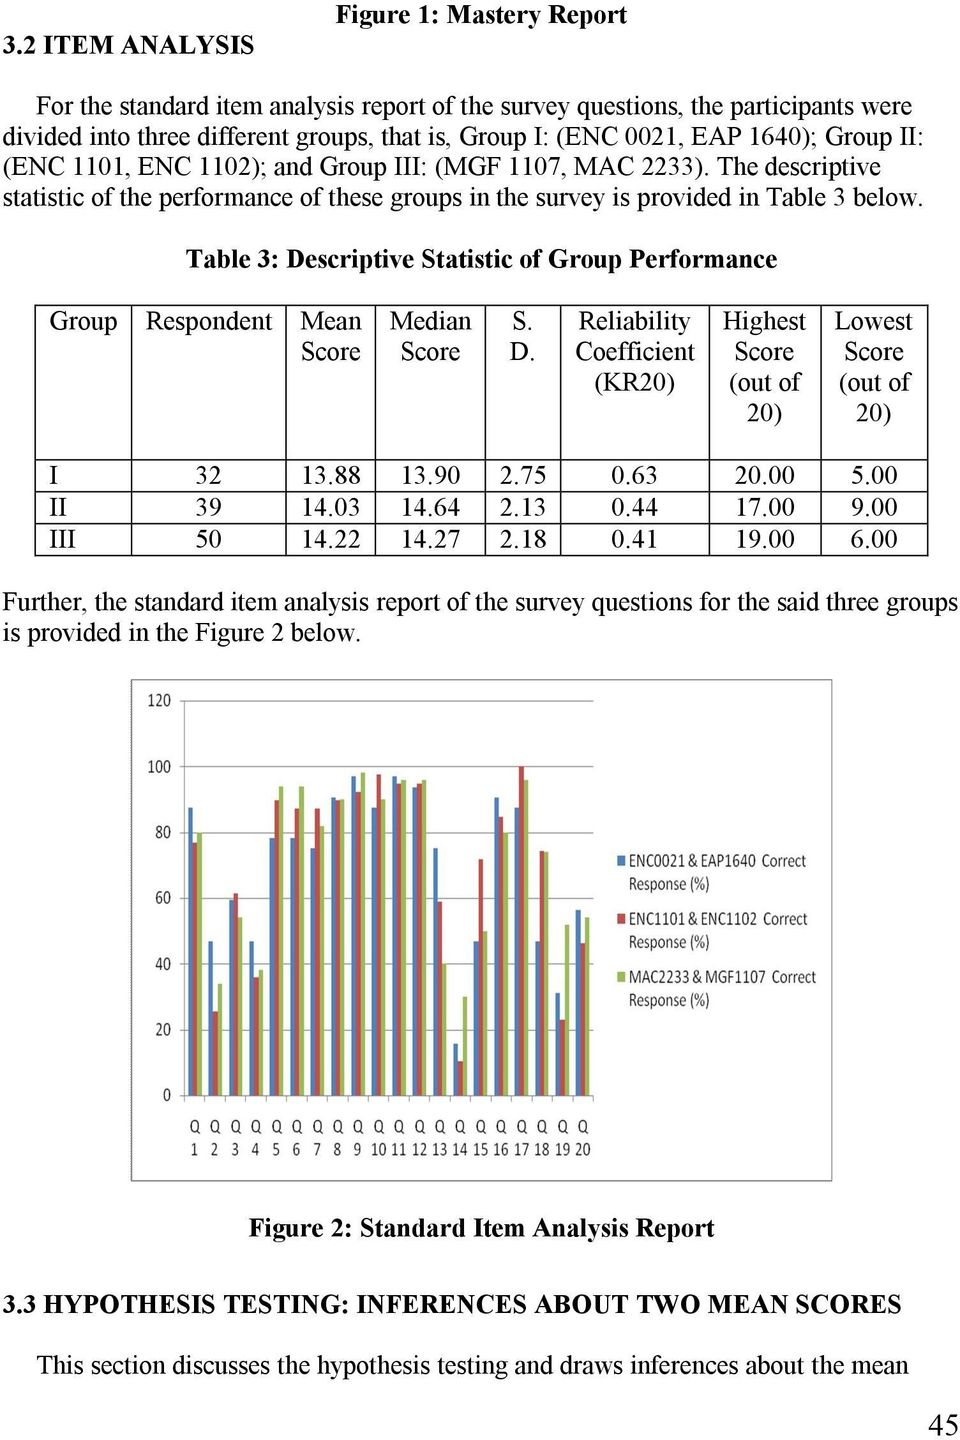 Table 3: Descriptive Statistic of Group Performance Group Respondent Mean Median S. D. Reliability Coefficient (KR20) Highest (out of 20) Lowest (out of 20) I 32 13.88 13.90 2.75 0.63 20.00 5.